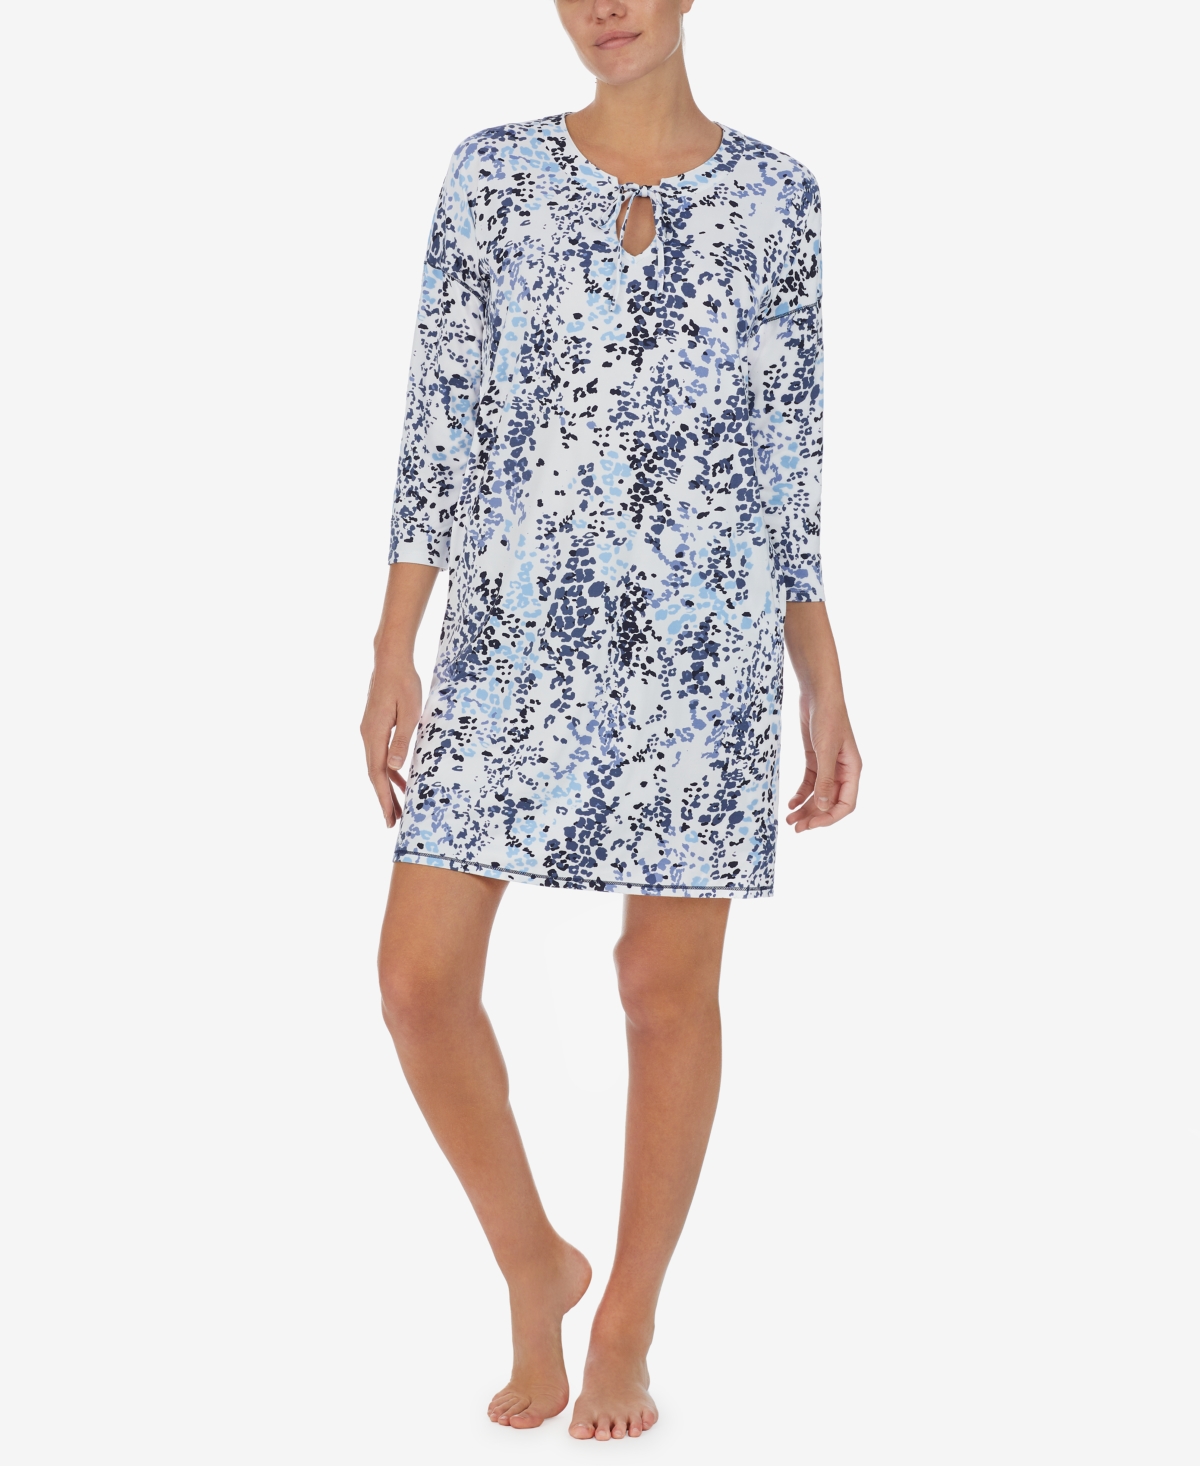 Women's ELLEN TRACY Nightgowns On Sale, Up To 70% Off | ModeSens